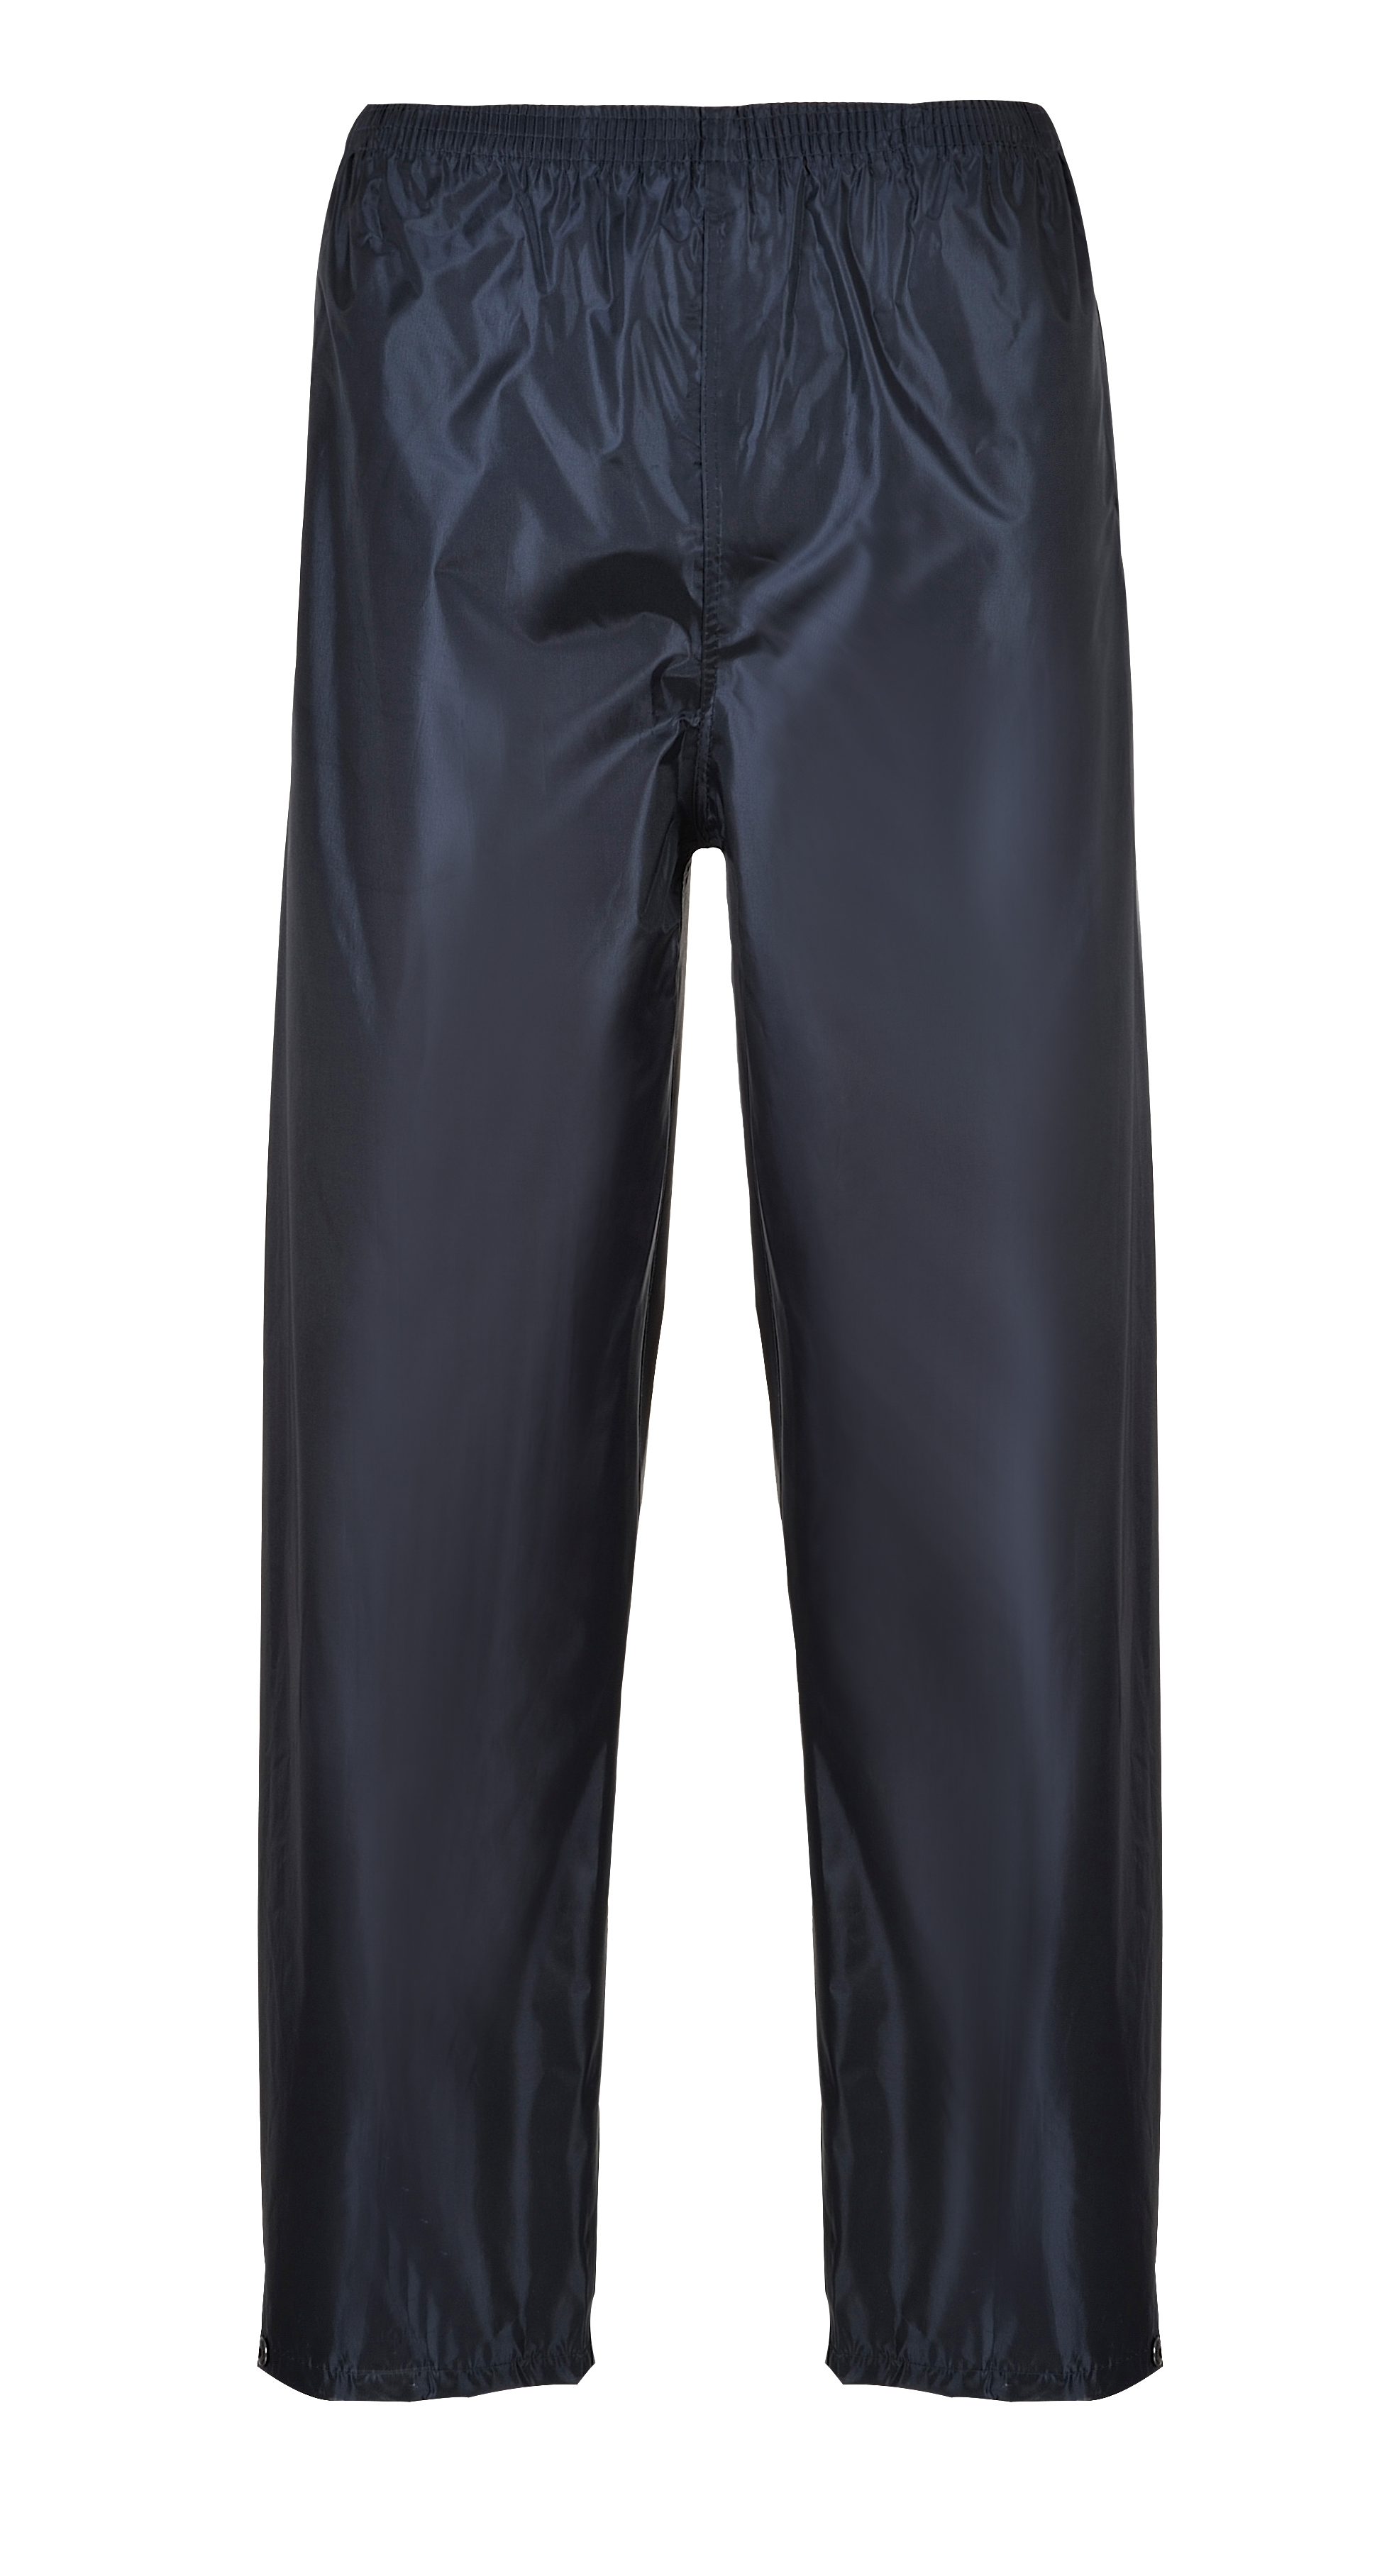 ax-httpss3.eu-west-2.amazonaws.comwebsystemstmp_for_downloadportwest-classic-adult-rain-trousers-navy.jpeg